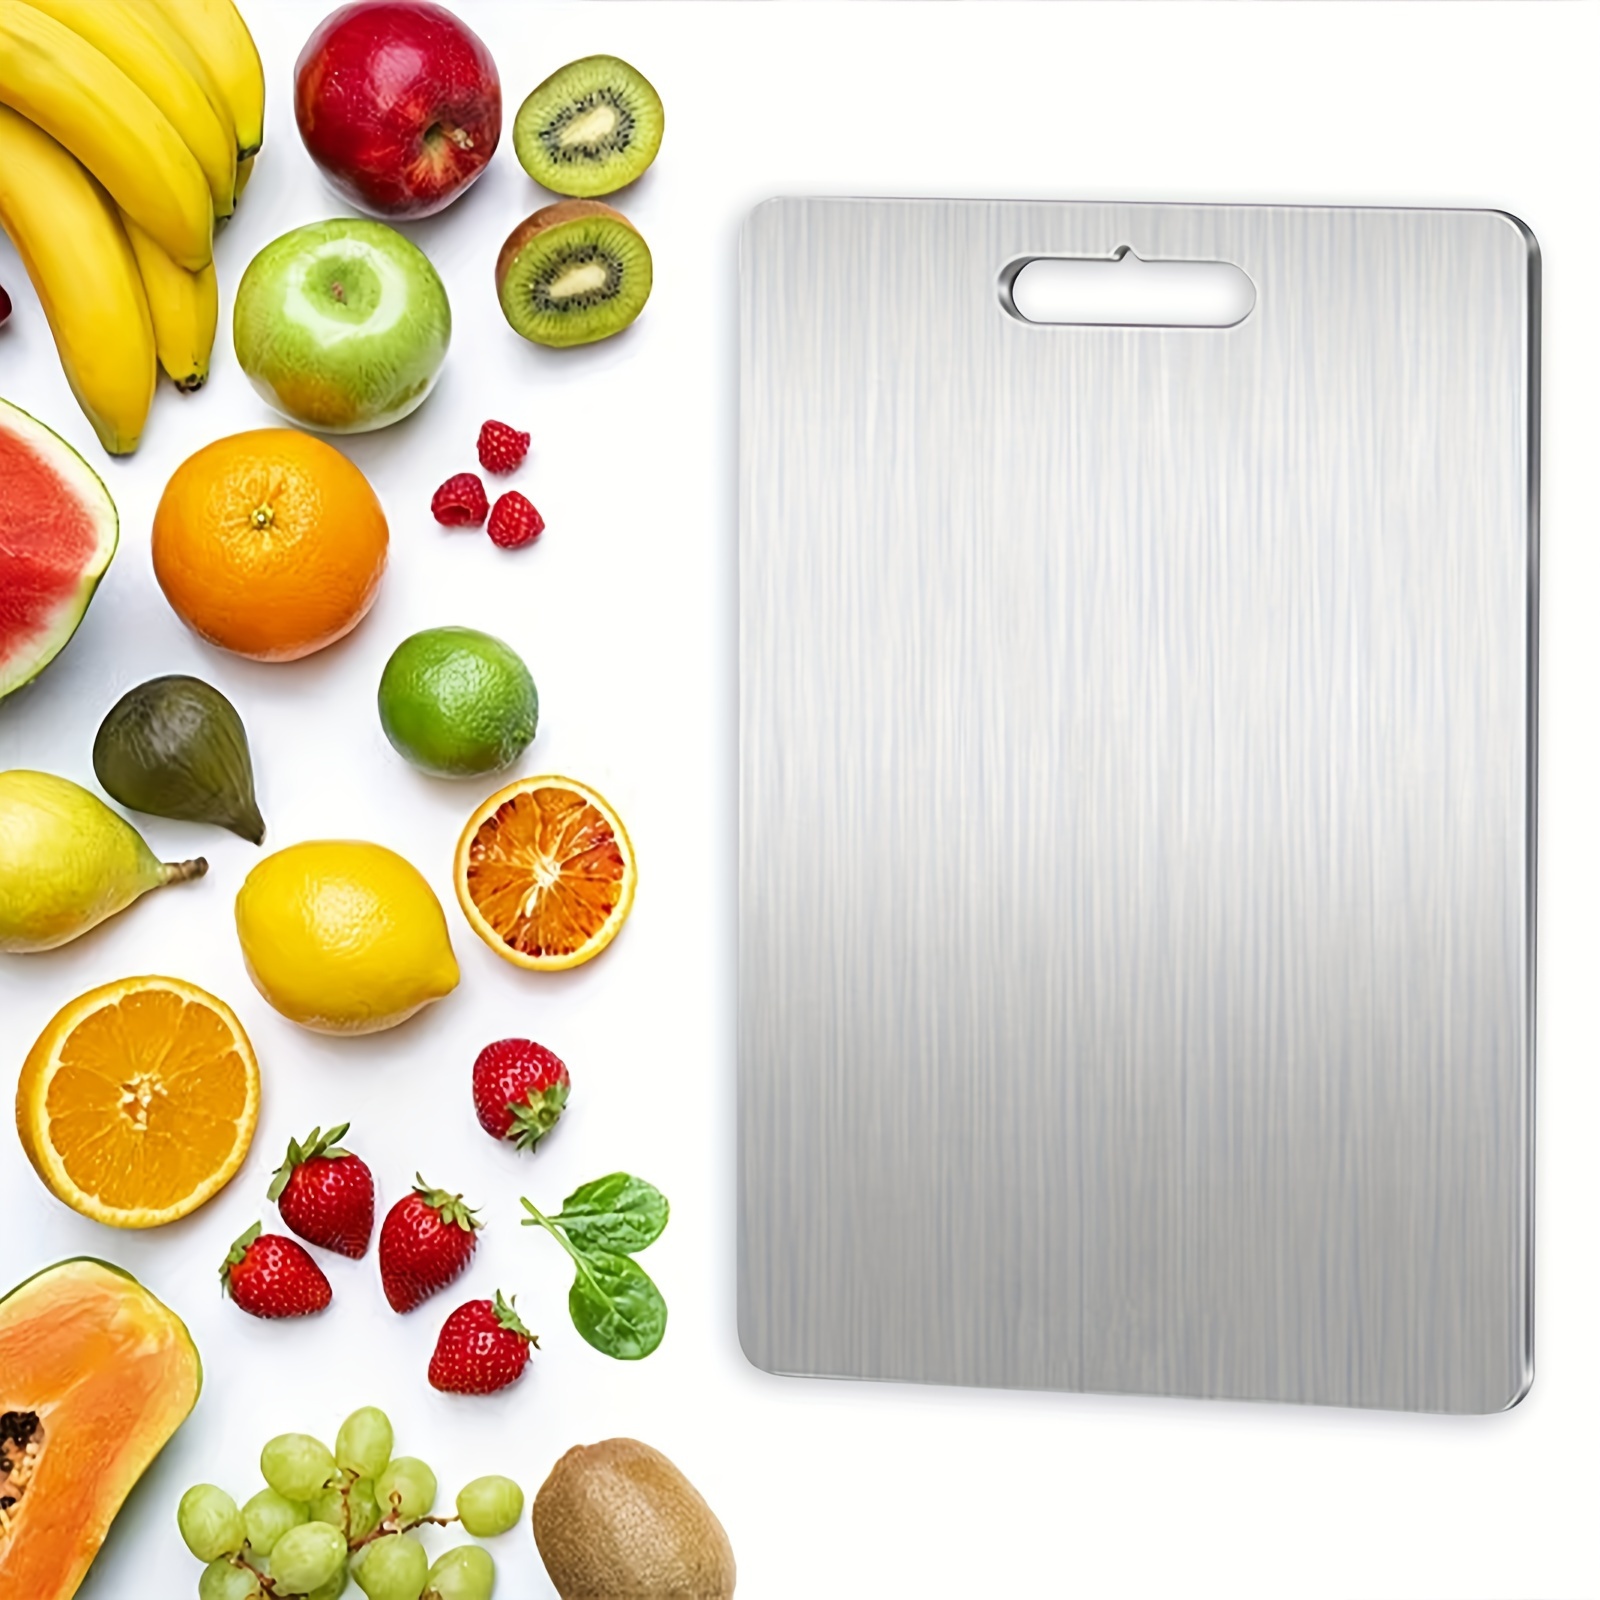 

Titanium Cutting Board - Stainless Steel Cutting Board For Kitchen 304 Chopping Board Food-grade For Meat Fruit Vegetables Dishwasher Safe Can Be Hung